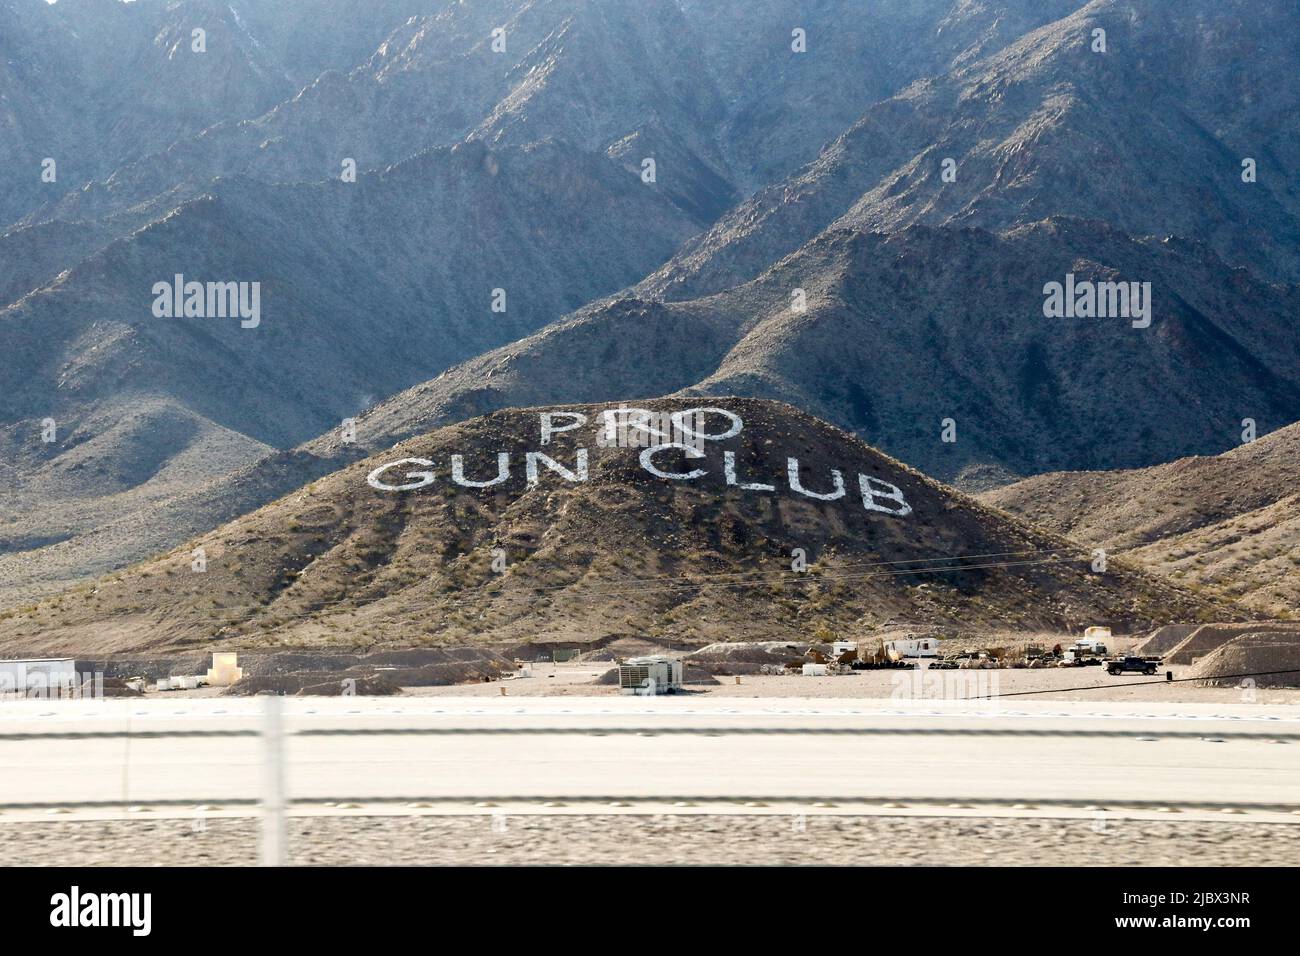 USA. 22nd Feb, 2019. A Las Vegas shooting range advertises itself prominently on the side of a foothill that is easily seen off Highway 95 in Nevada on February 22, 2019. Pro Gun Vegas sits on 160 acres of land complete with a 5,000 square-foot clubhouse, machine gun ranges, training ranges, and target stands. (Photo by: Alexandra Buxbaum/Sipa USA) Credit: Sipa USA/Alamy Live News Stock Photo